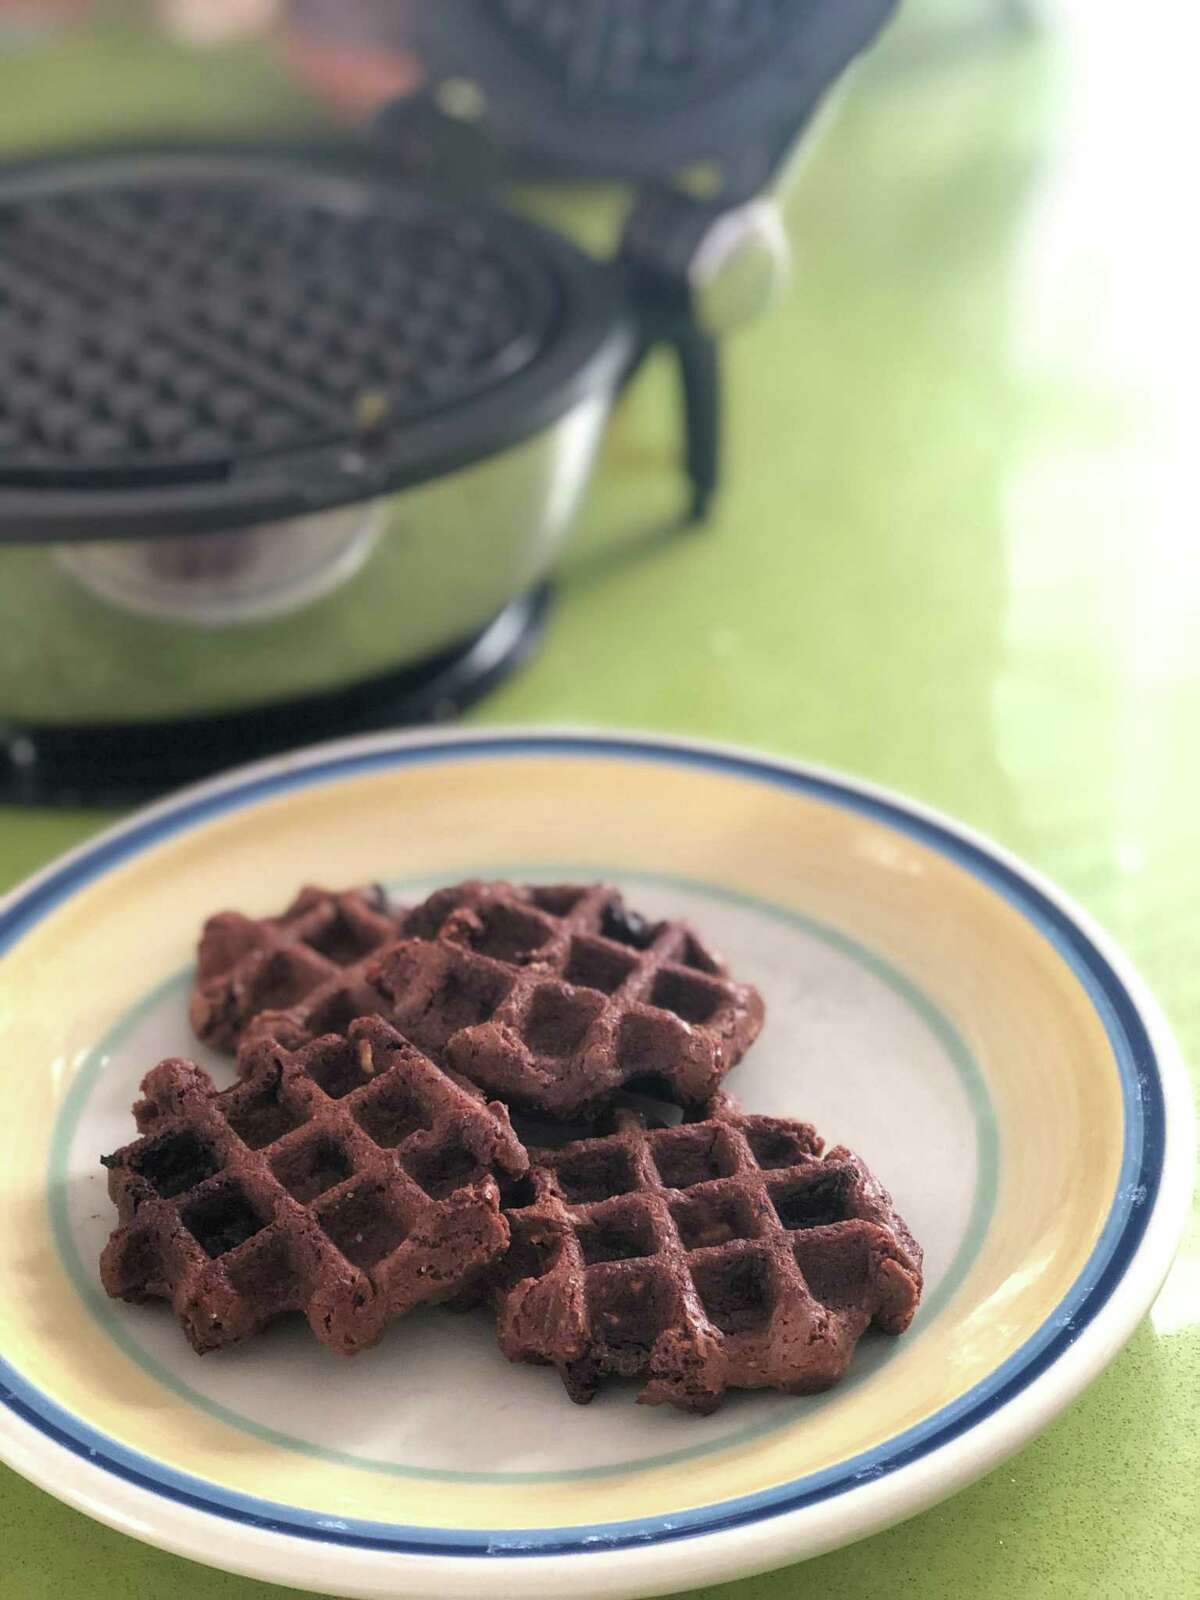 Chocolate cookies, when waffled, make a great exterior for homemade ice cream sandwiches.